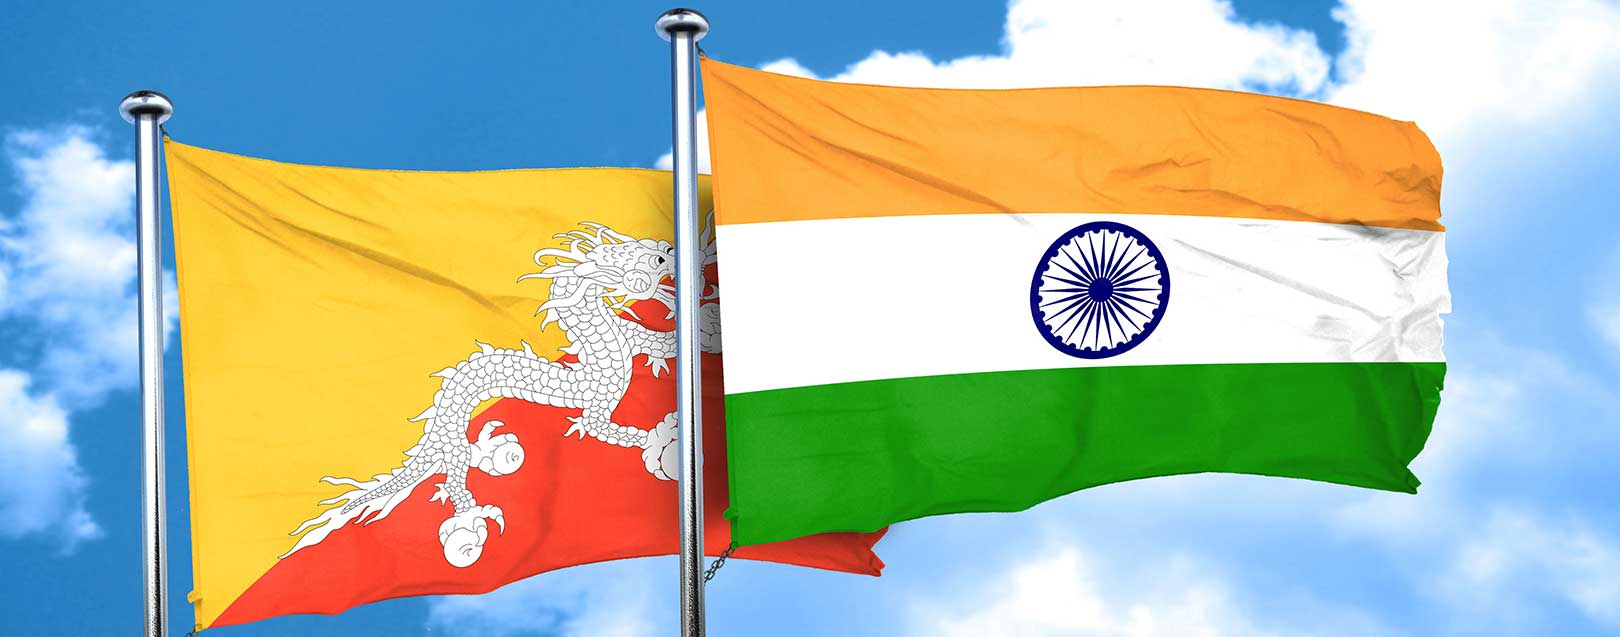 New trade pact between India and Bhutan begins from July 29